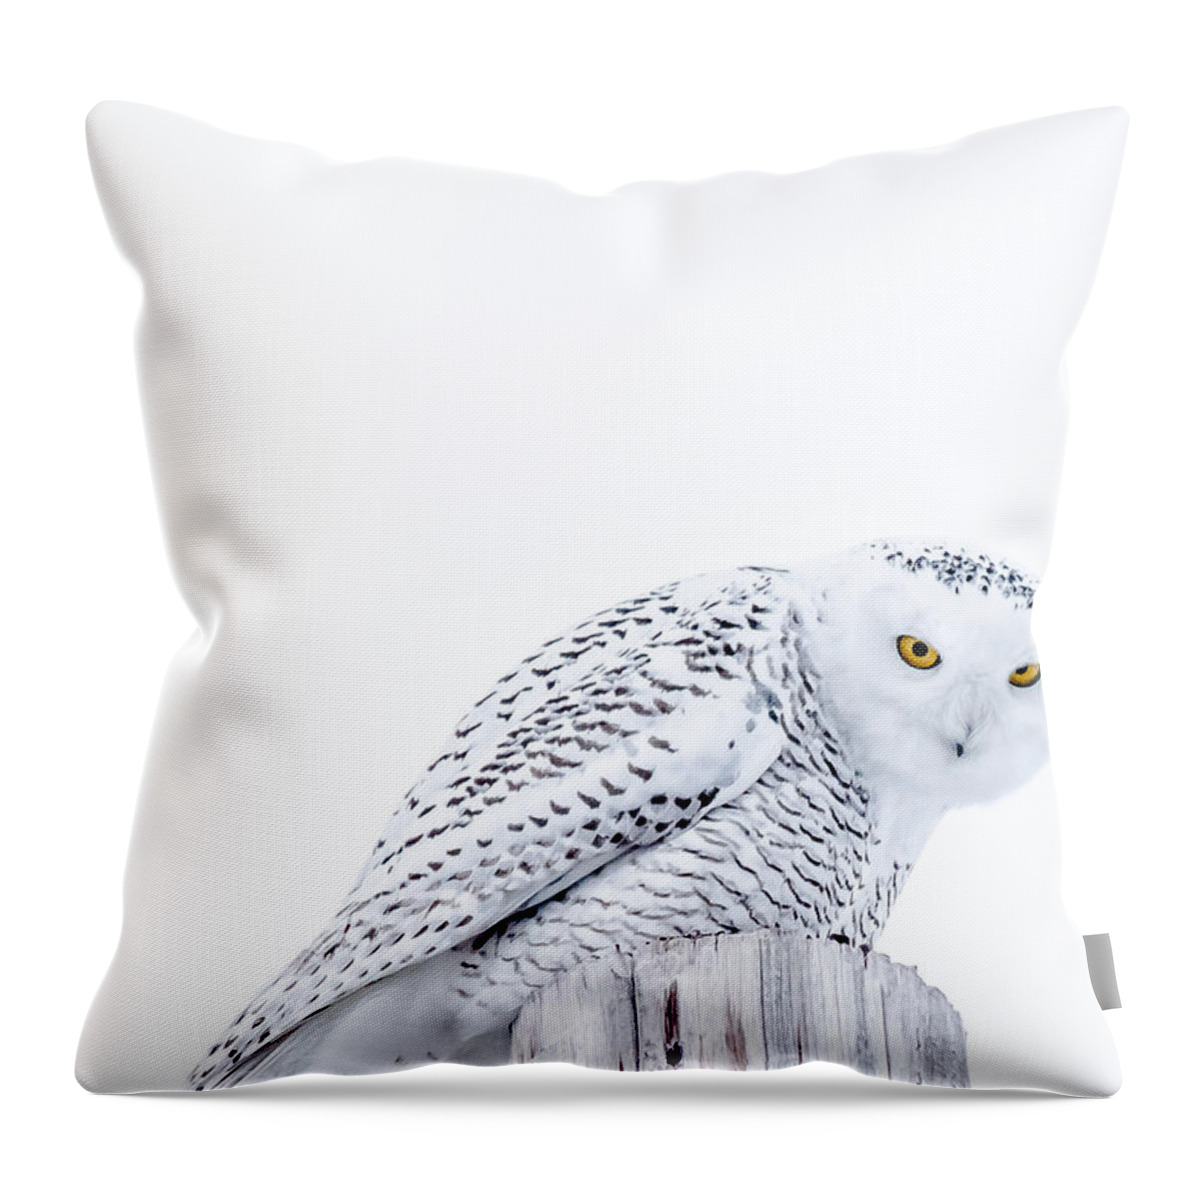 Snowy Throw Pillow featuring the photograph Piercing Eyes by Cheryl Baxter